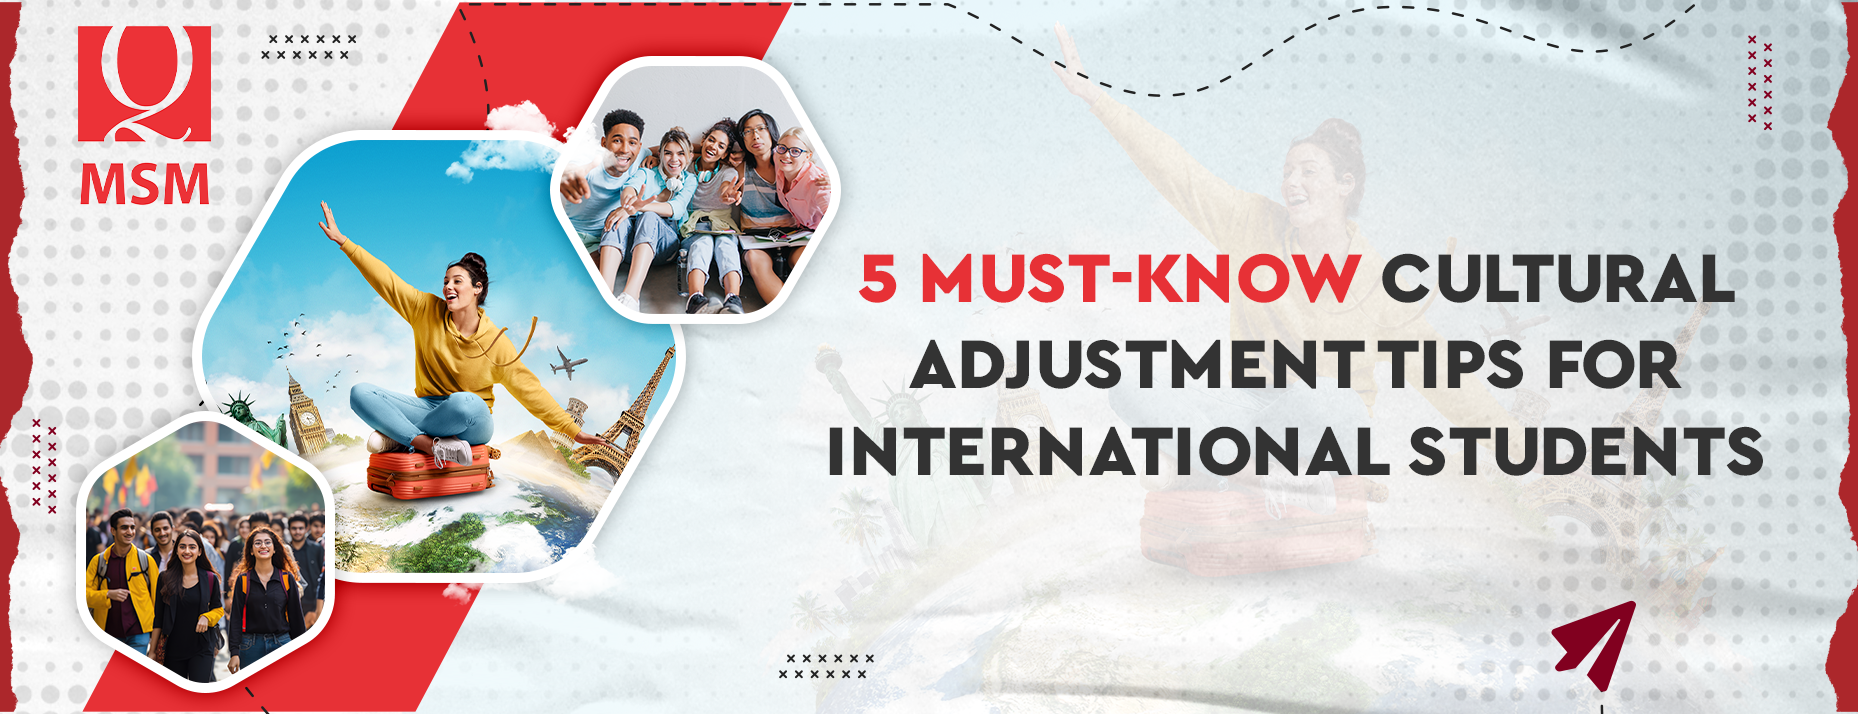 5 Must-Know Cultural Adjustment Tips for International Students